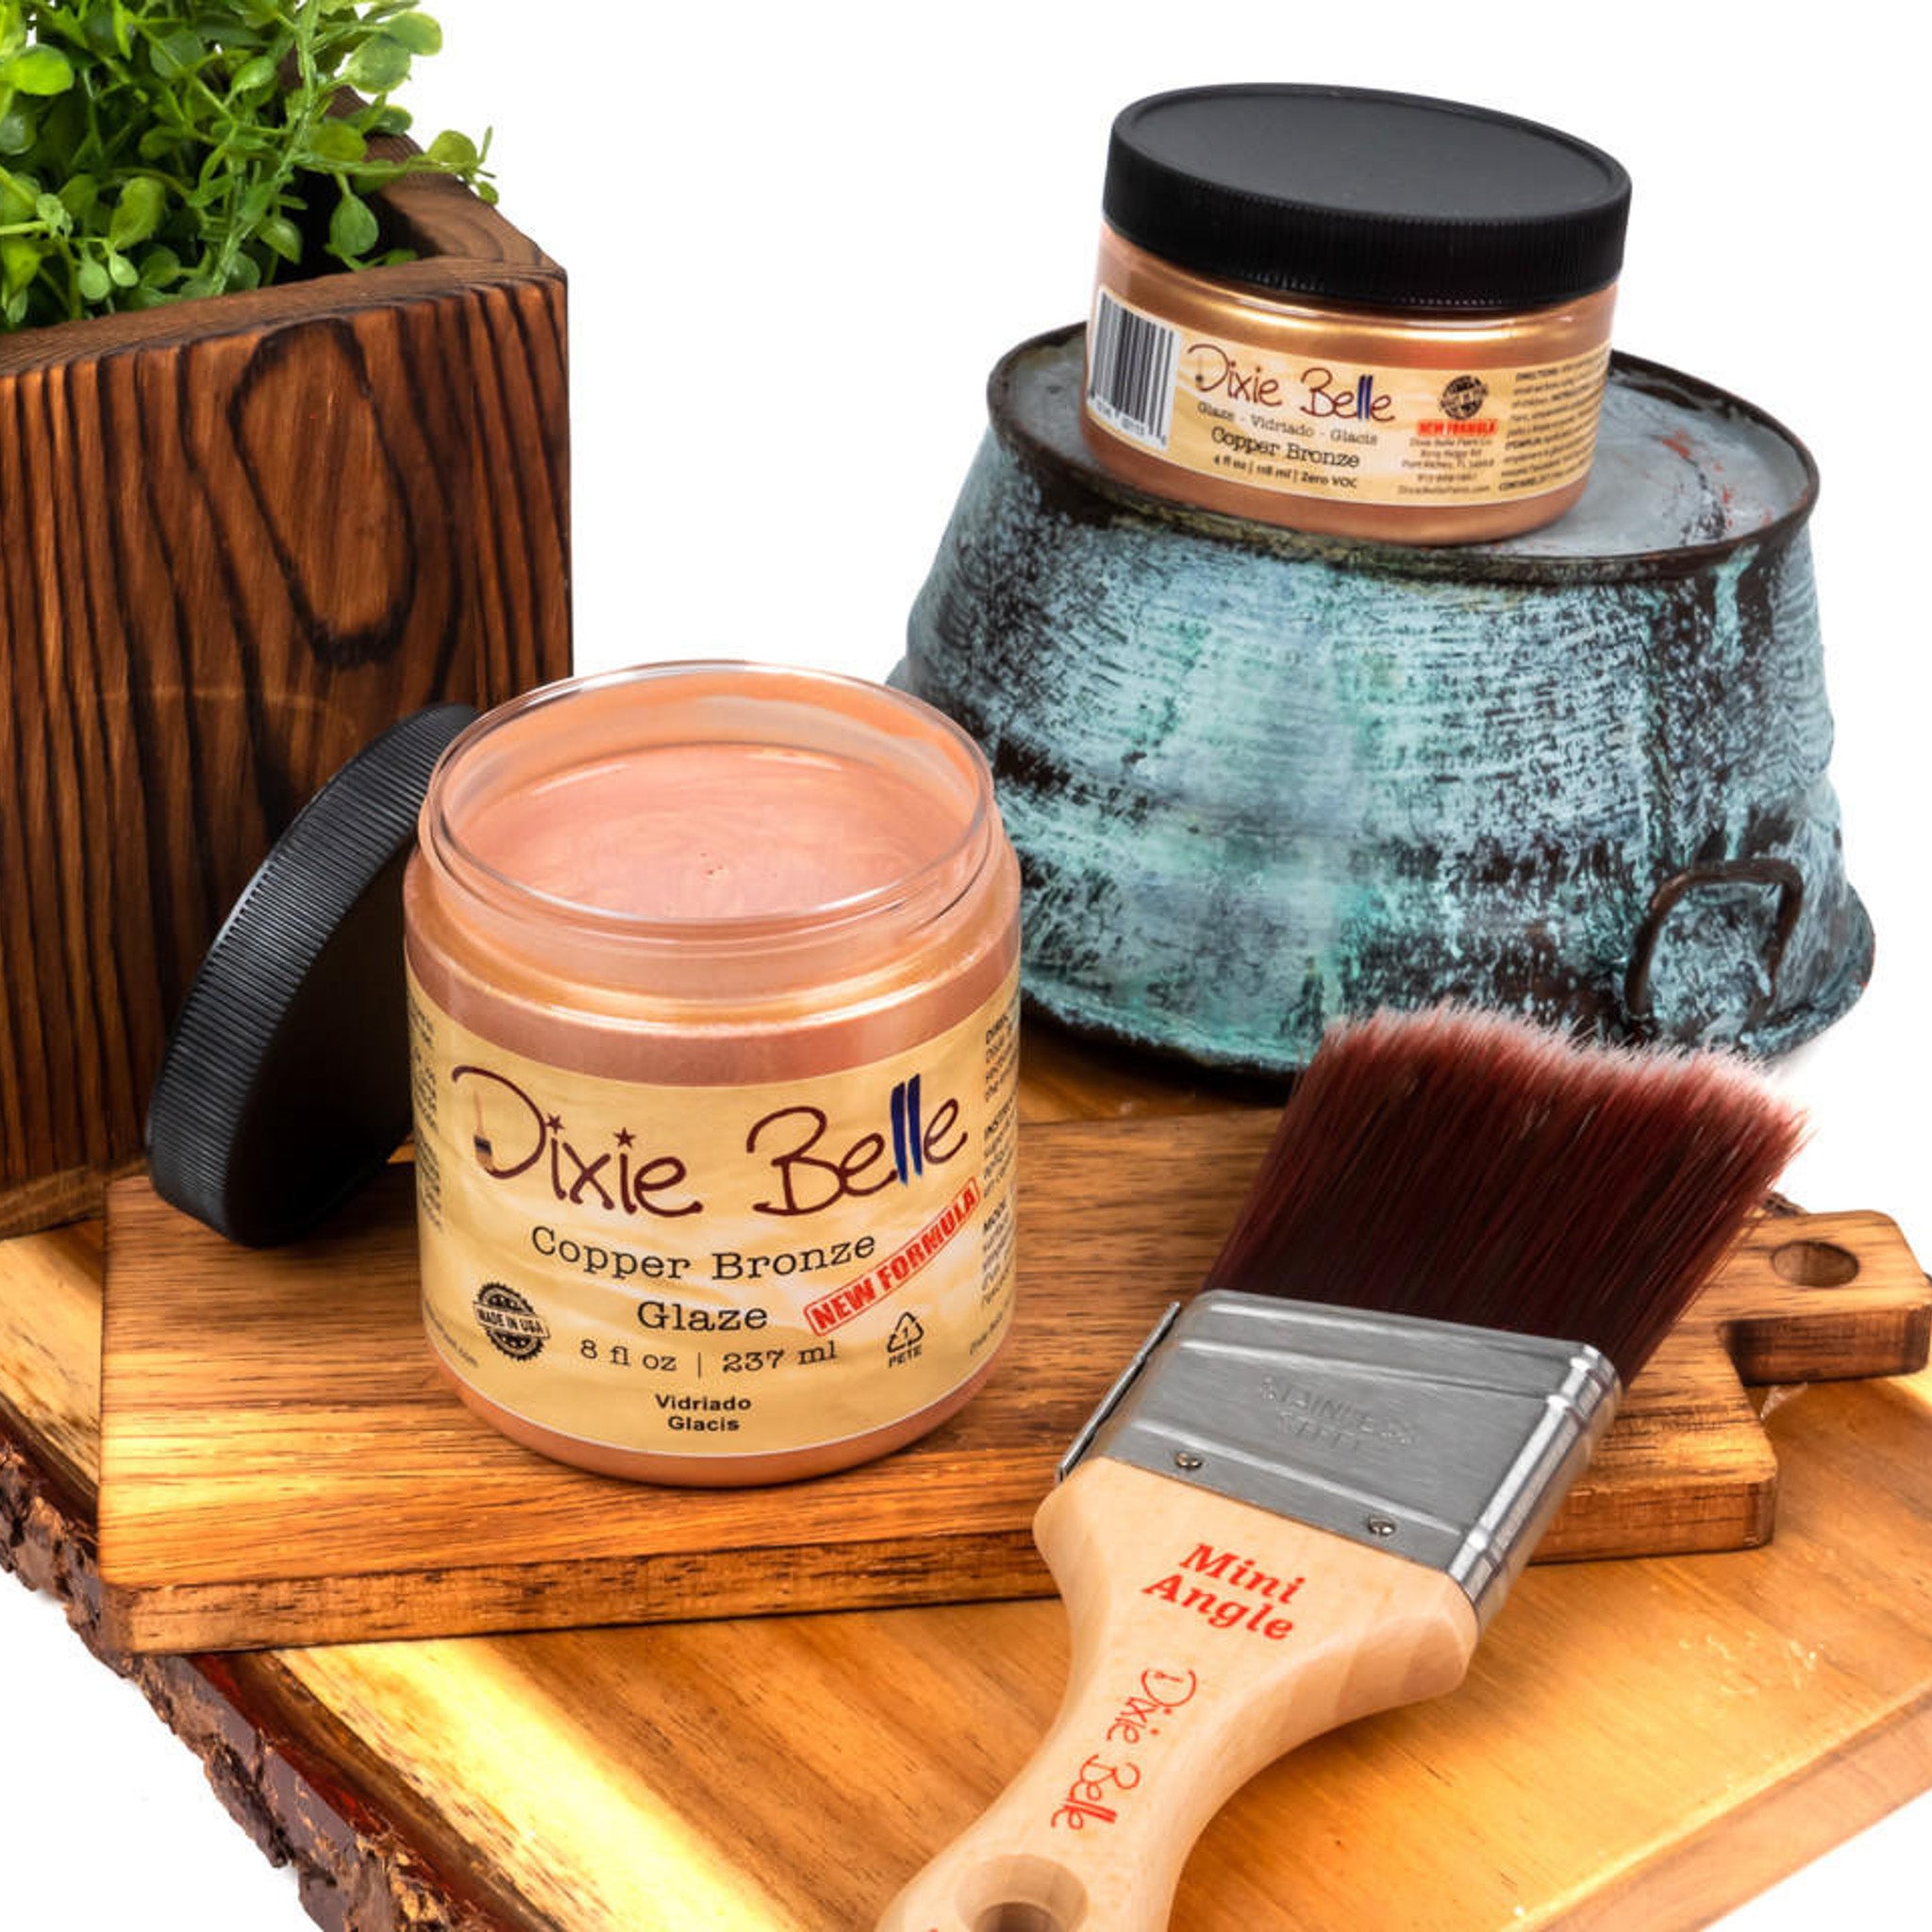 An 8oz/237ml and 4oz/118ml of Dixie Belle Paint's Copper Bronze Glaze are featured on a wood shelf with a Dixie Belle mini Angle paint brush.